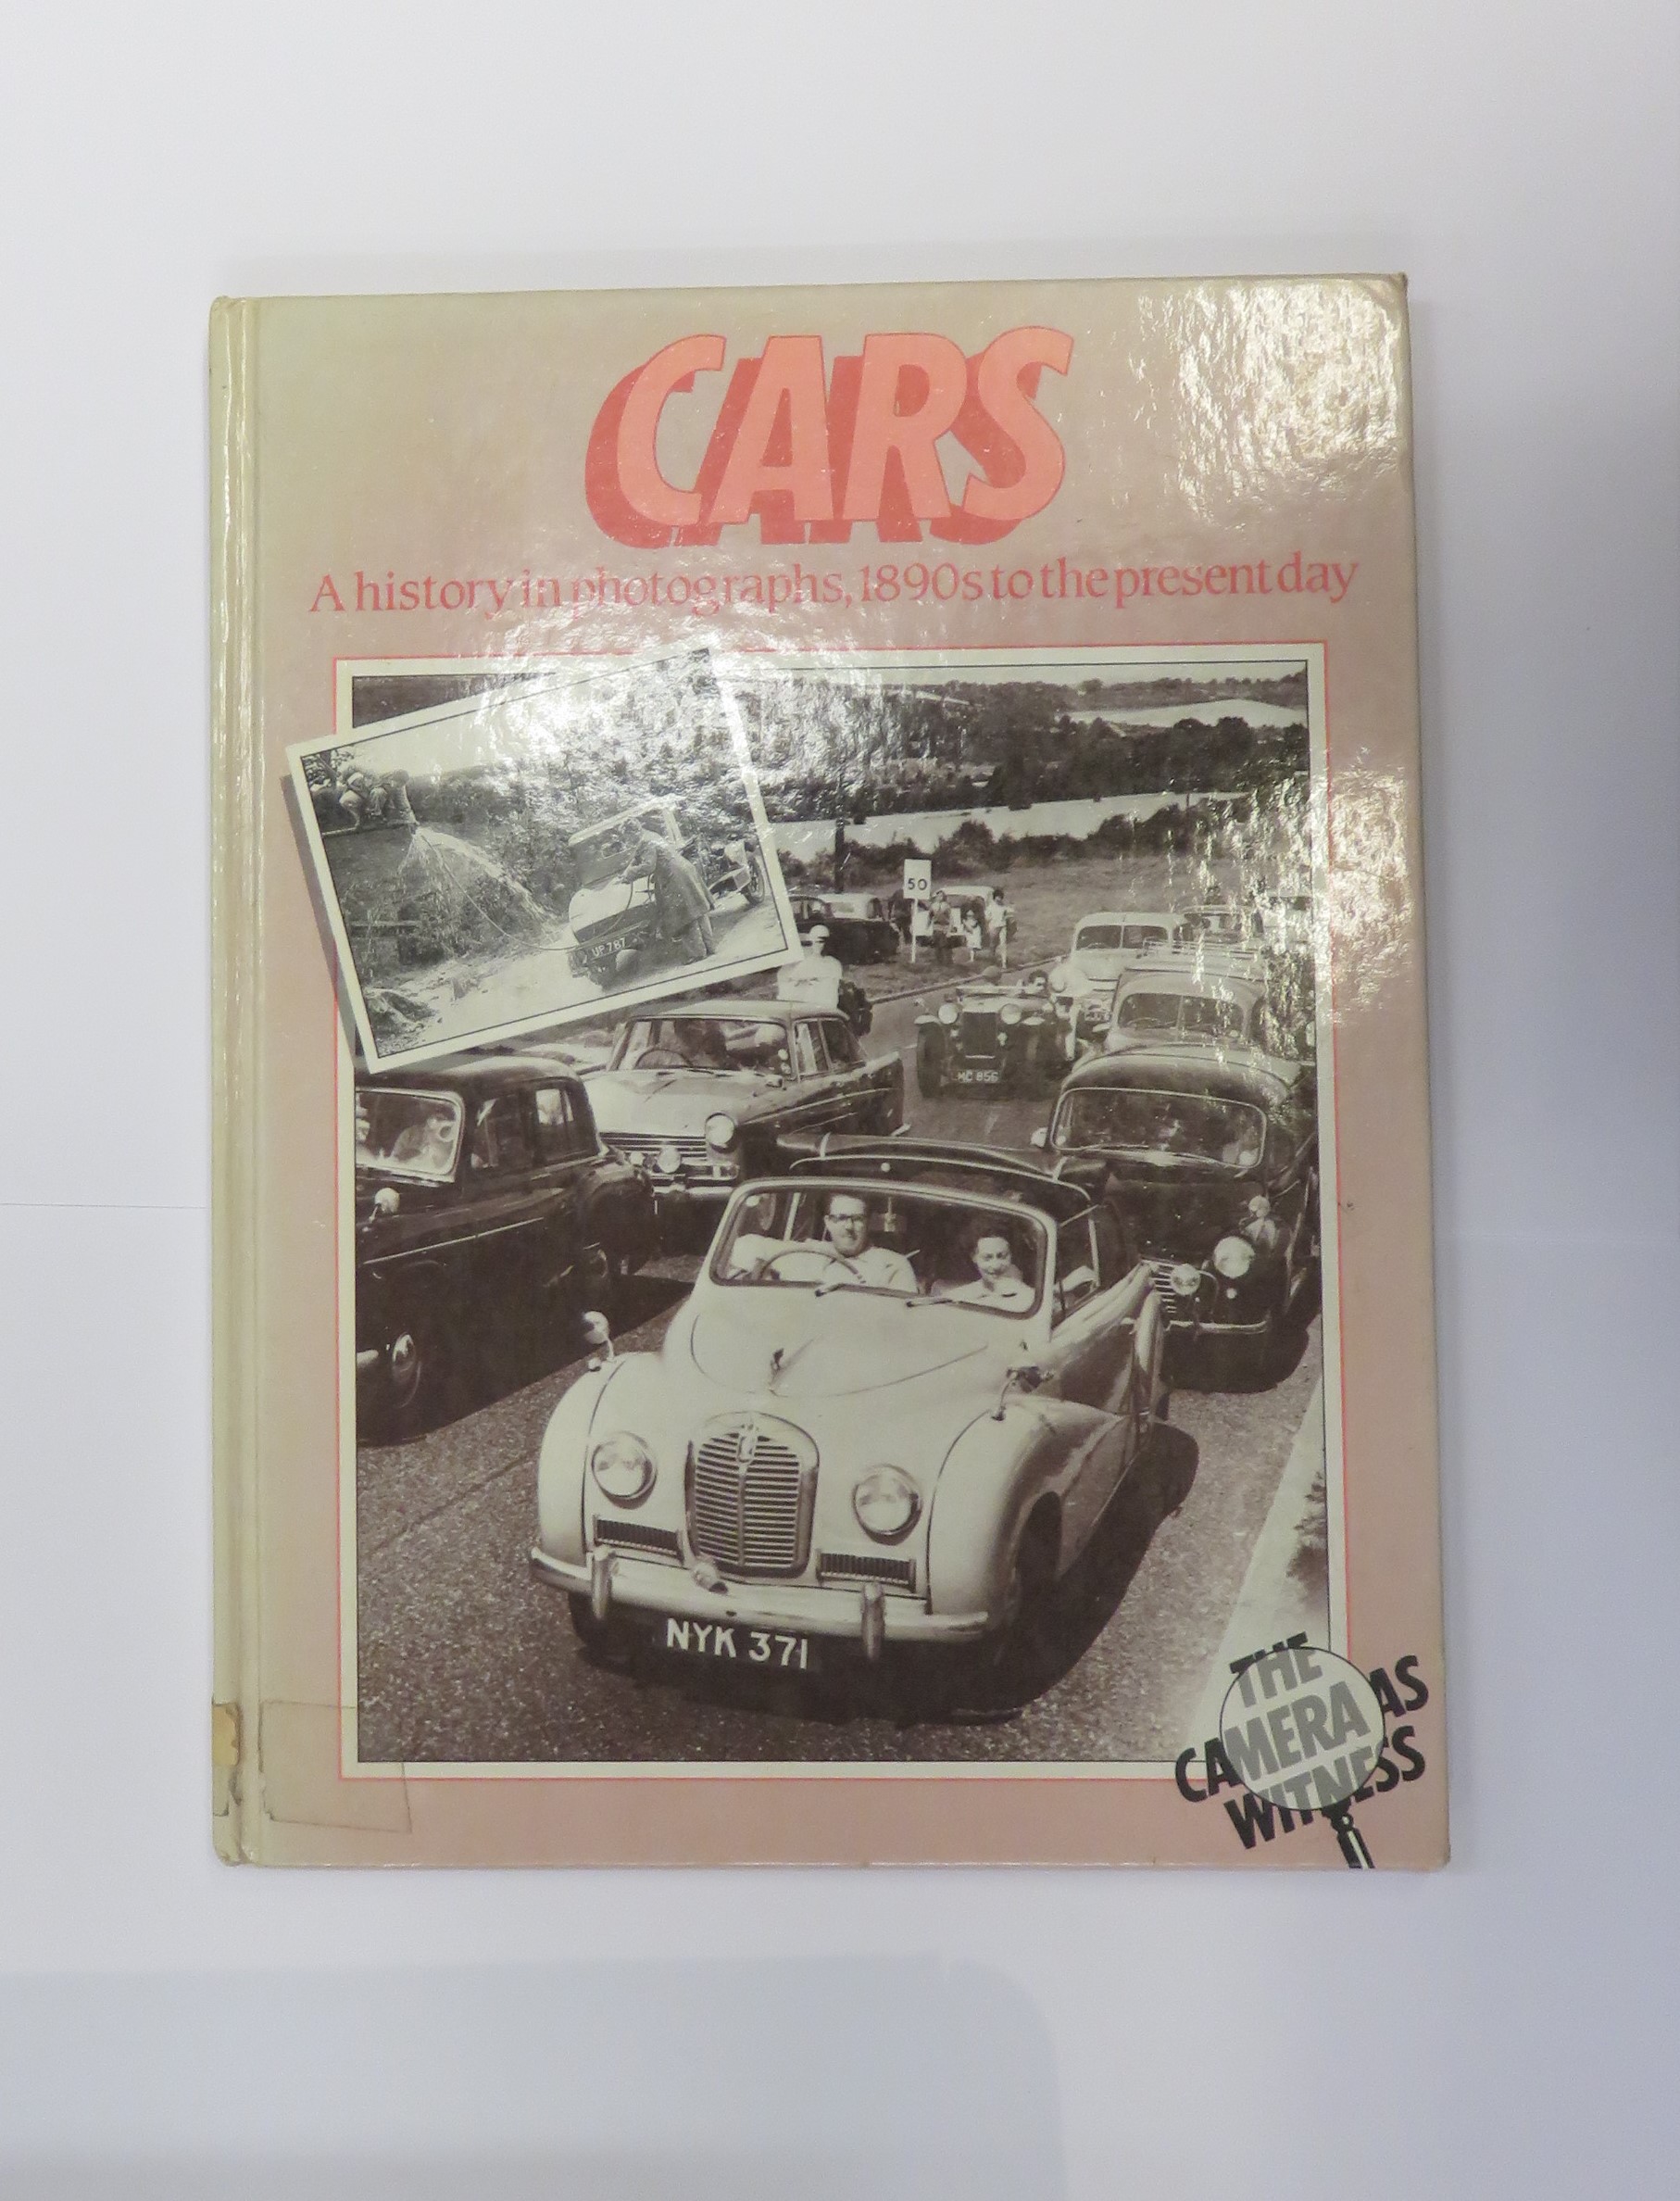 Cars: A History in Photographs, 1890s to the Present Day